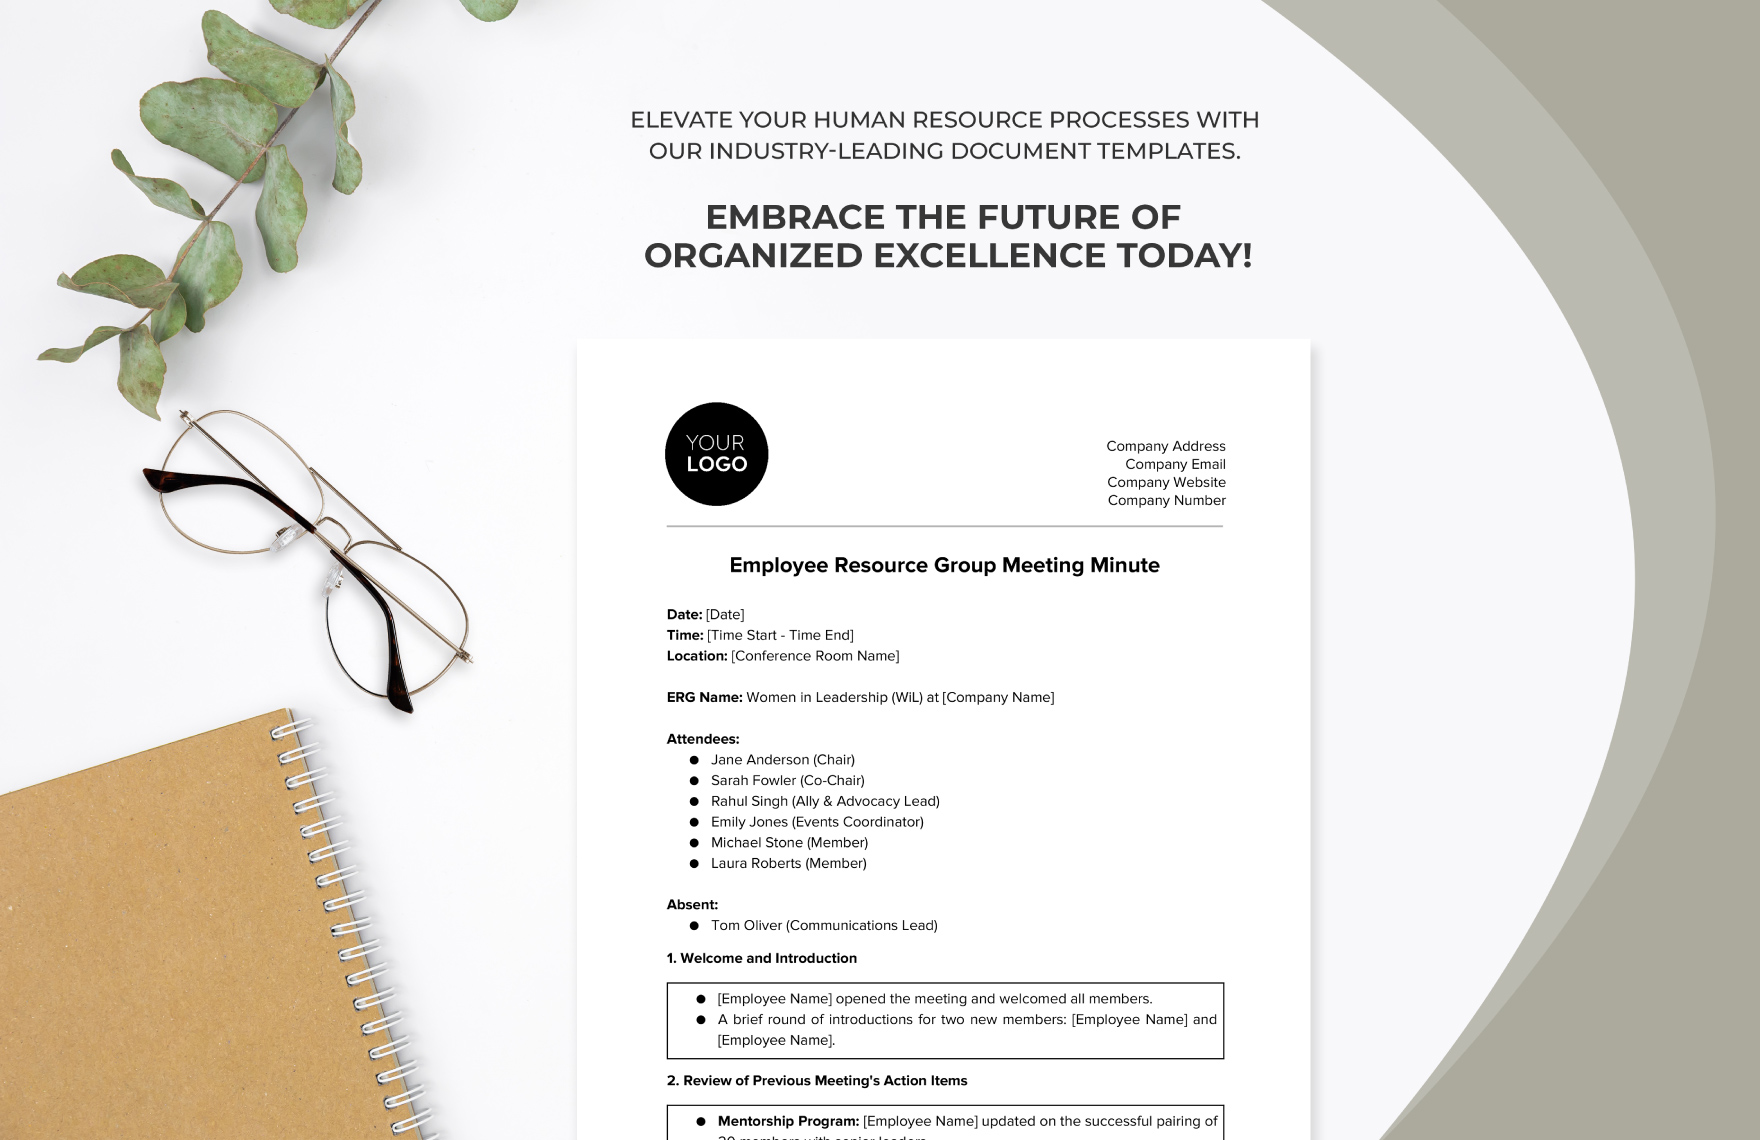 Employee Resource Group Meeting Minute HR Template